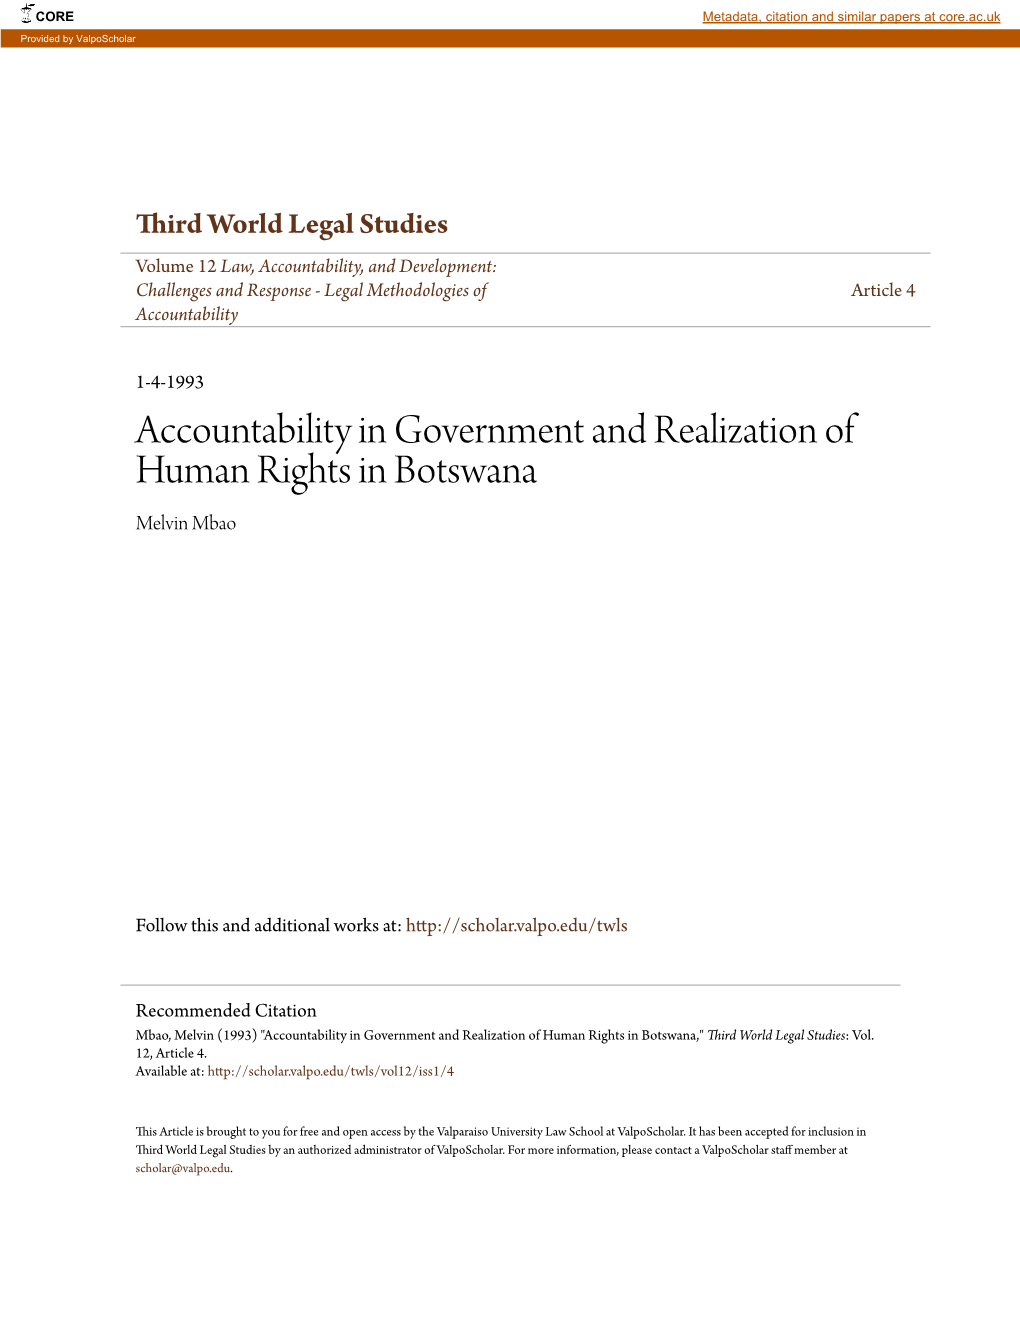 Accountability in Government and Realization of Human Rights in Botswana Melvin Mbao